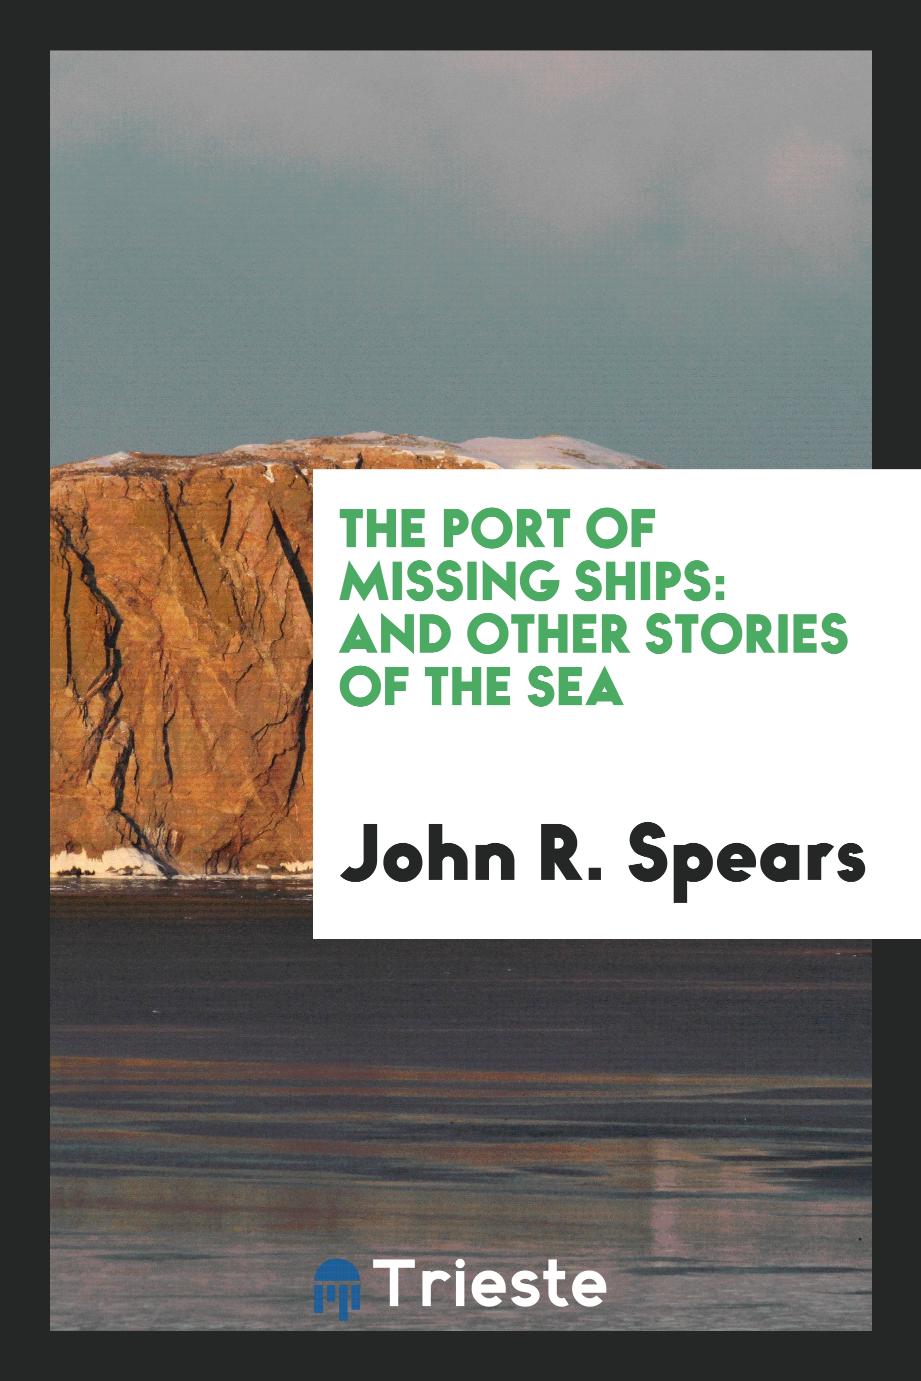 The Port of Missing Ships: And Other Stories of the Sea